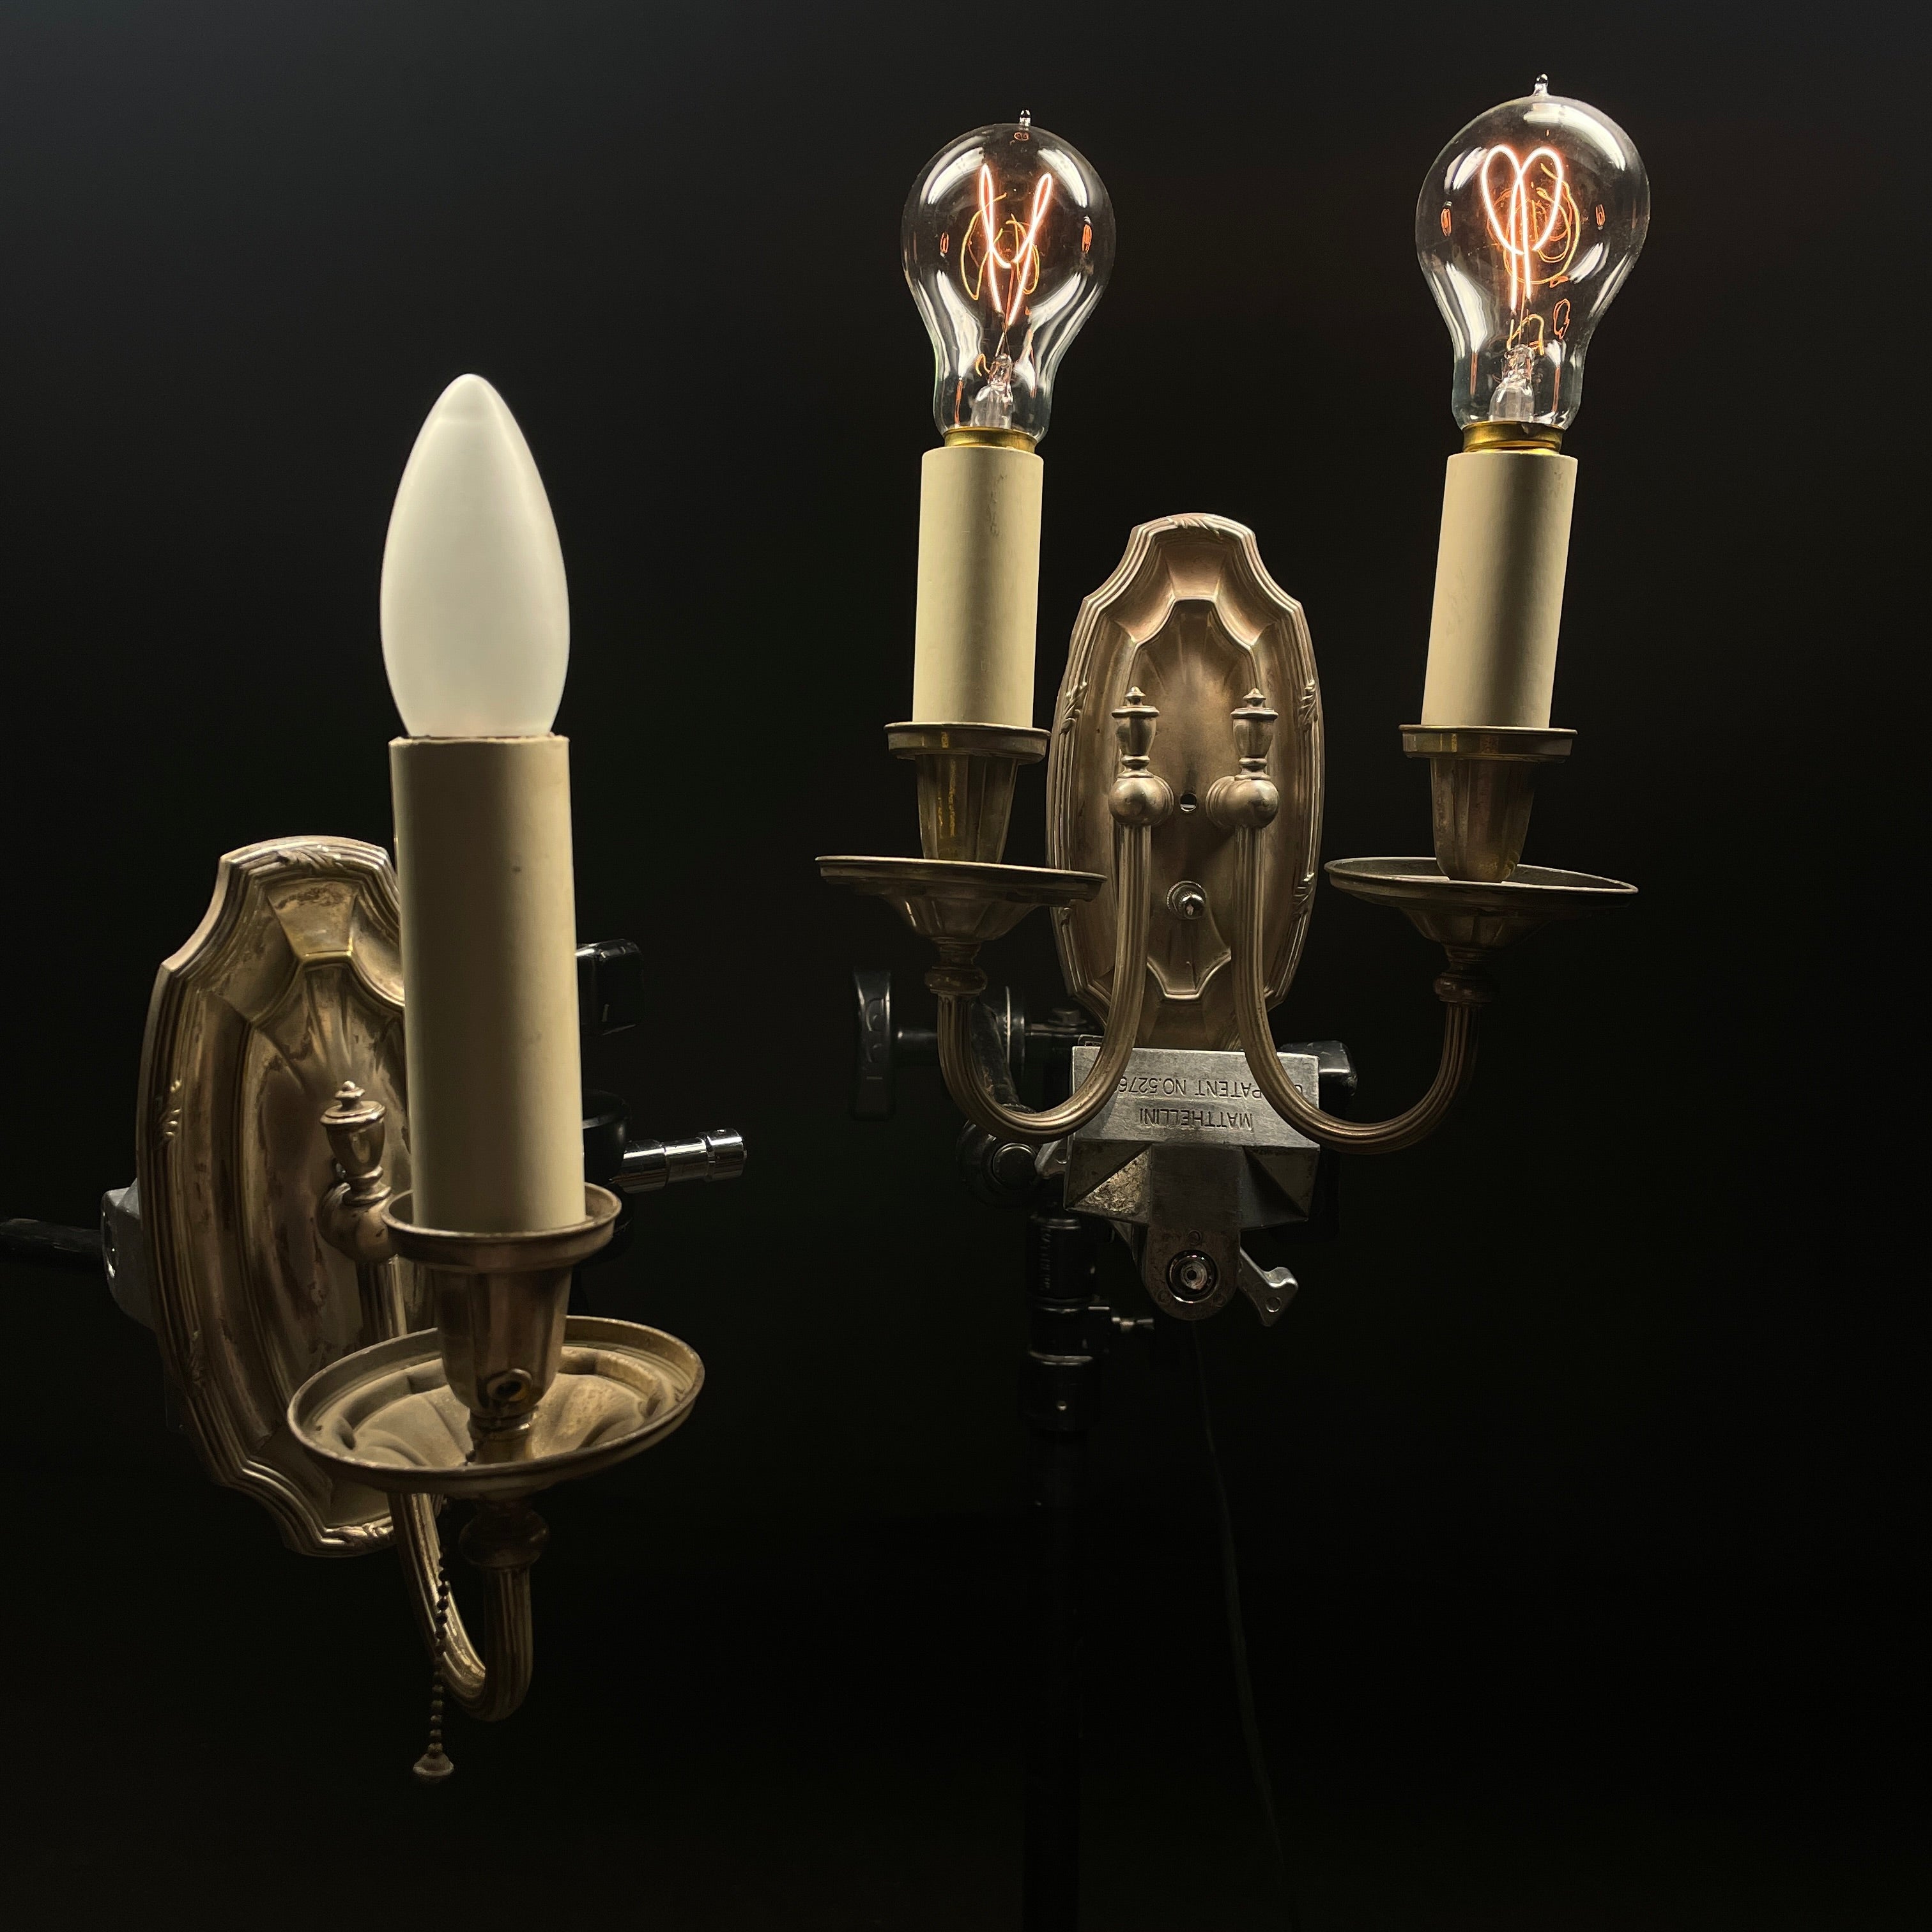 Vintage Silver Plated Brass Sconces